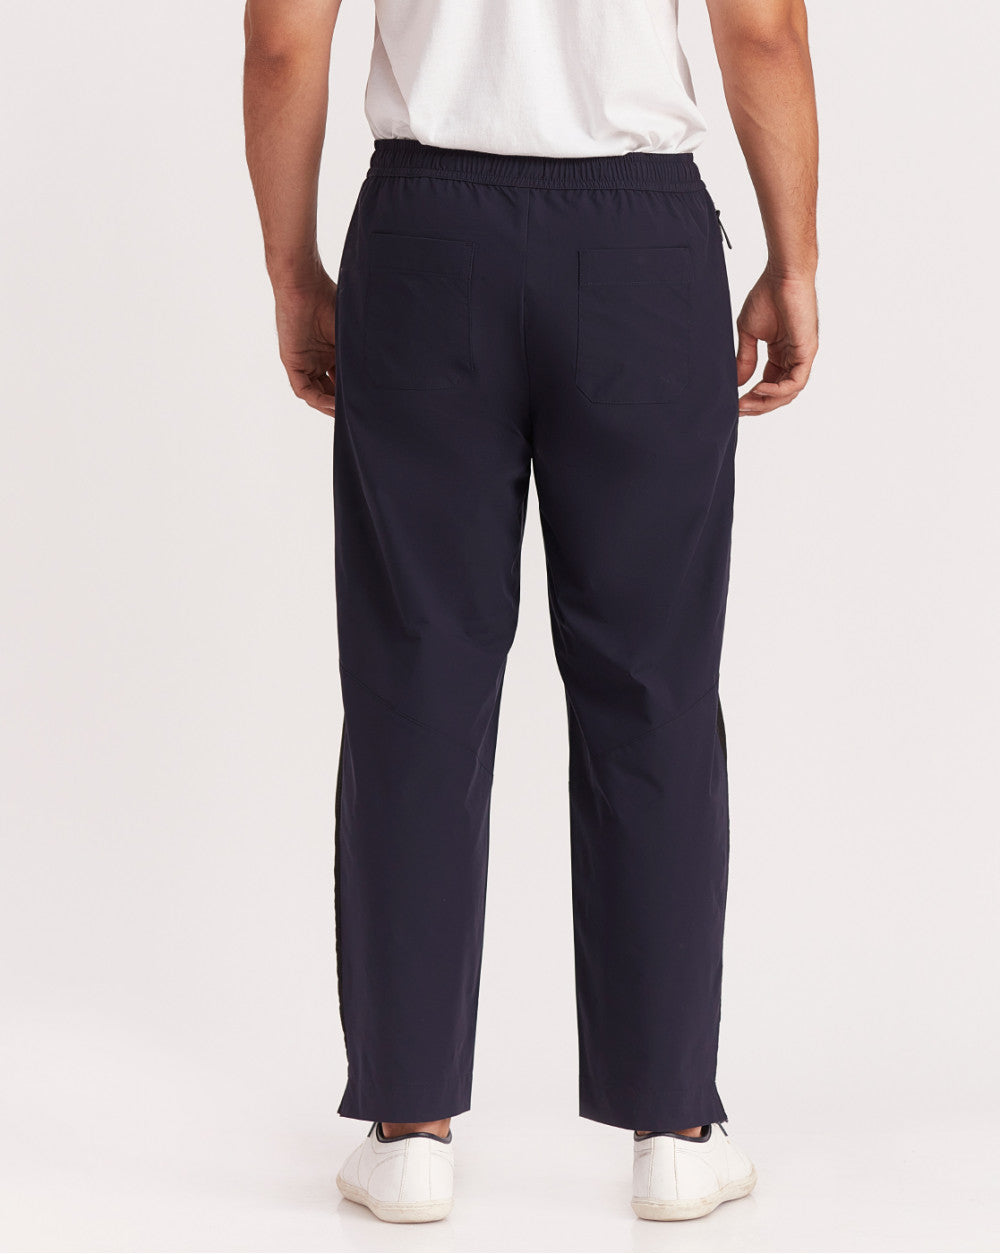 Regular Fit All-Day Track Pants - Navy